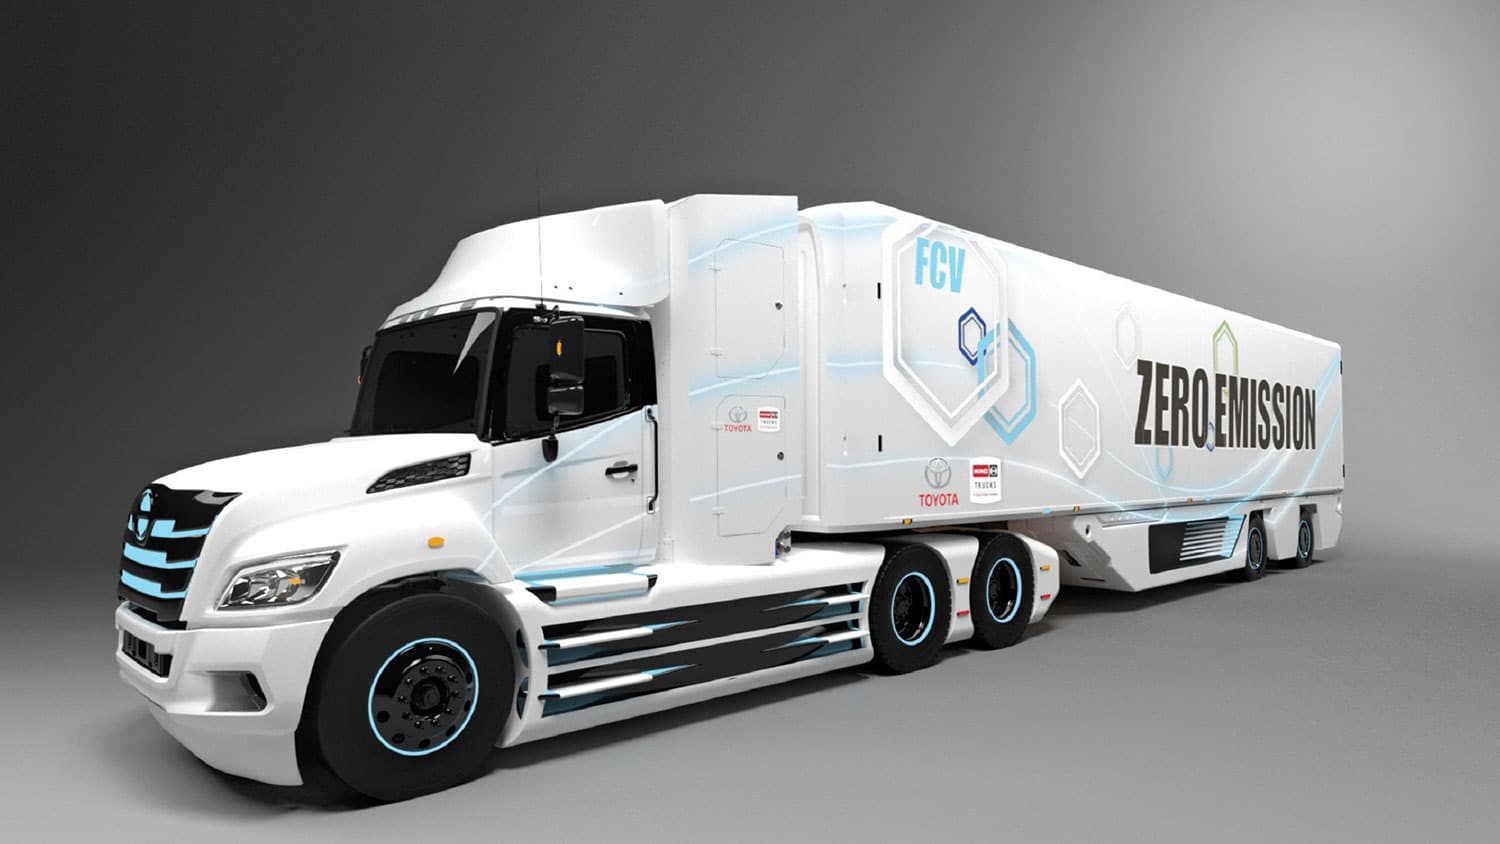 Toyota and Hino partner to develop class 8 fuel cell electric truck.